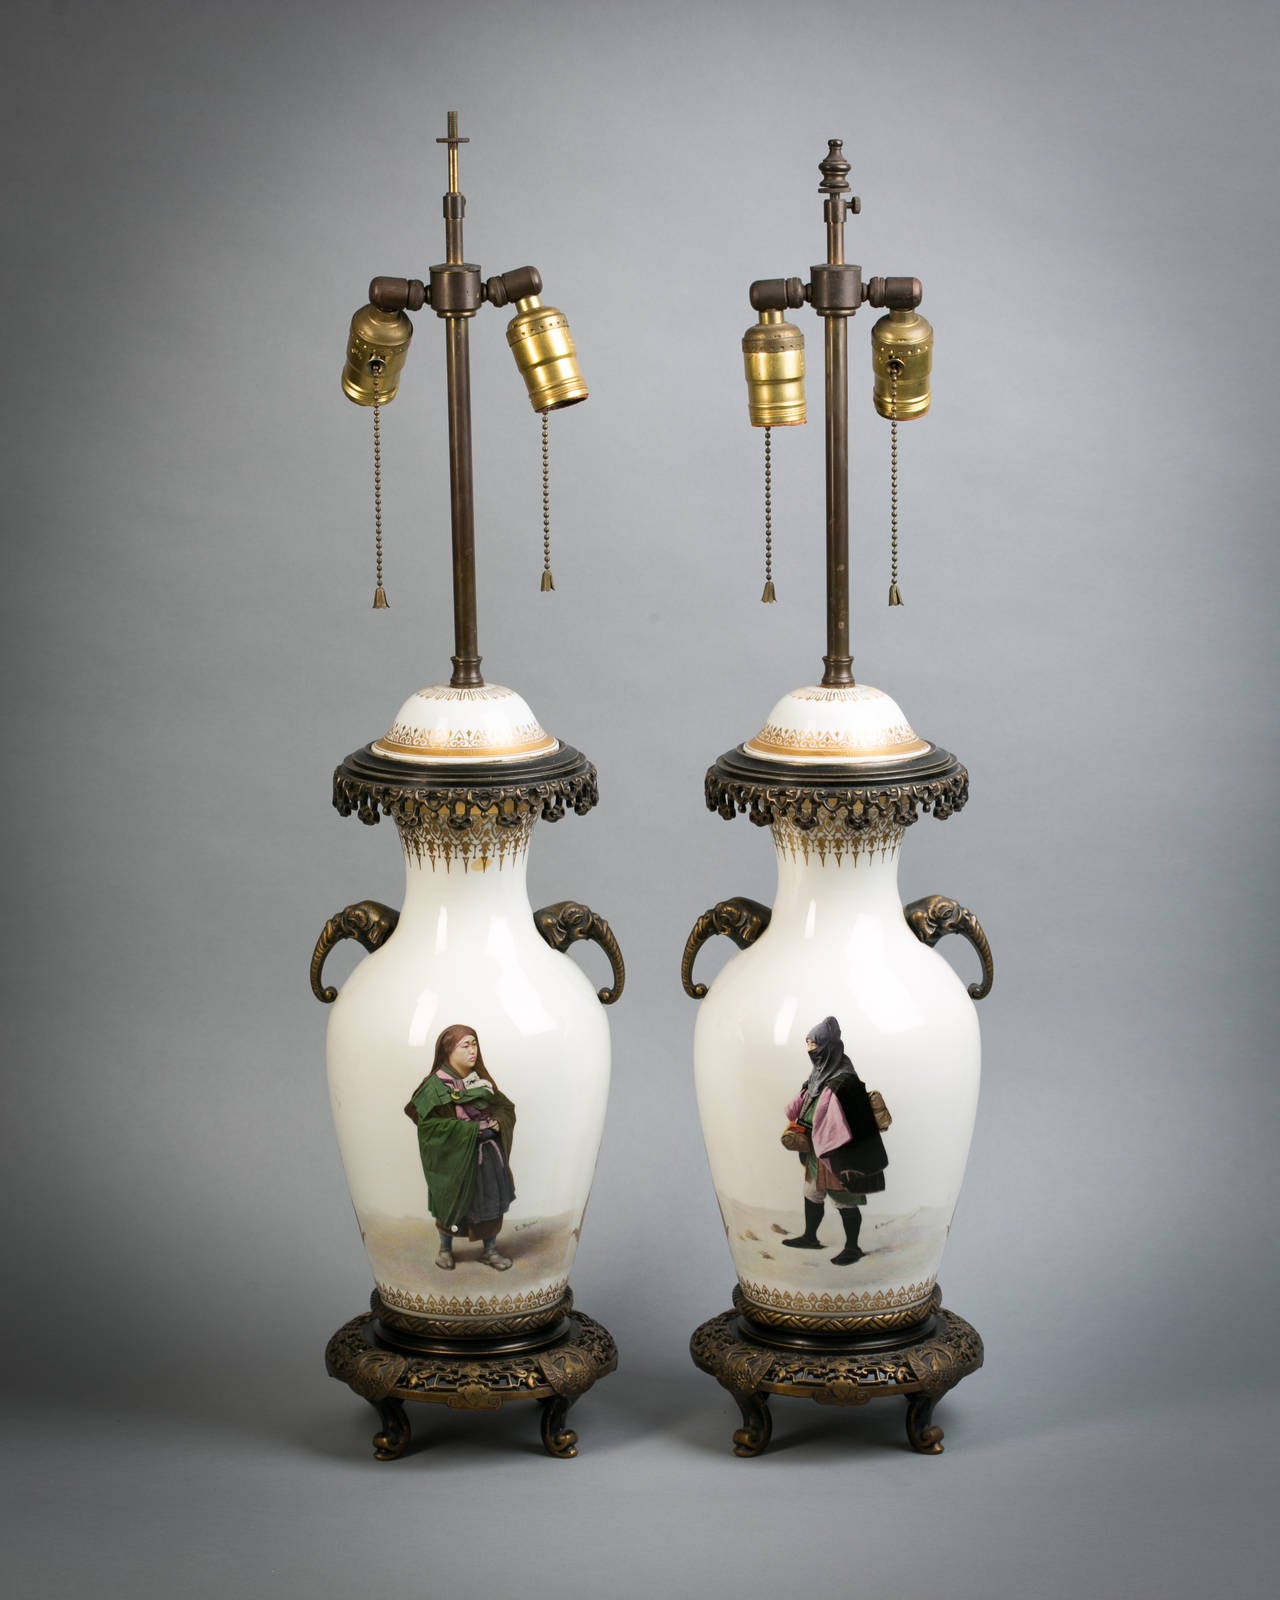 Pair of bronze-mounted French porcelain covered vases mounted as lamps, circa 1885.

Signed Eugene Sieffert. 

The elephant handles are bronze.